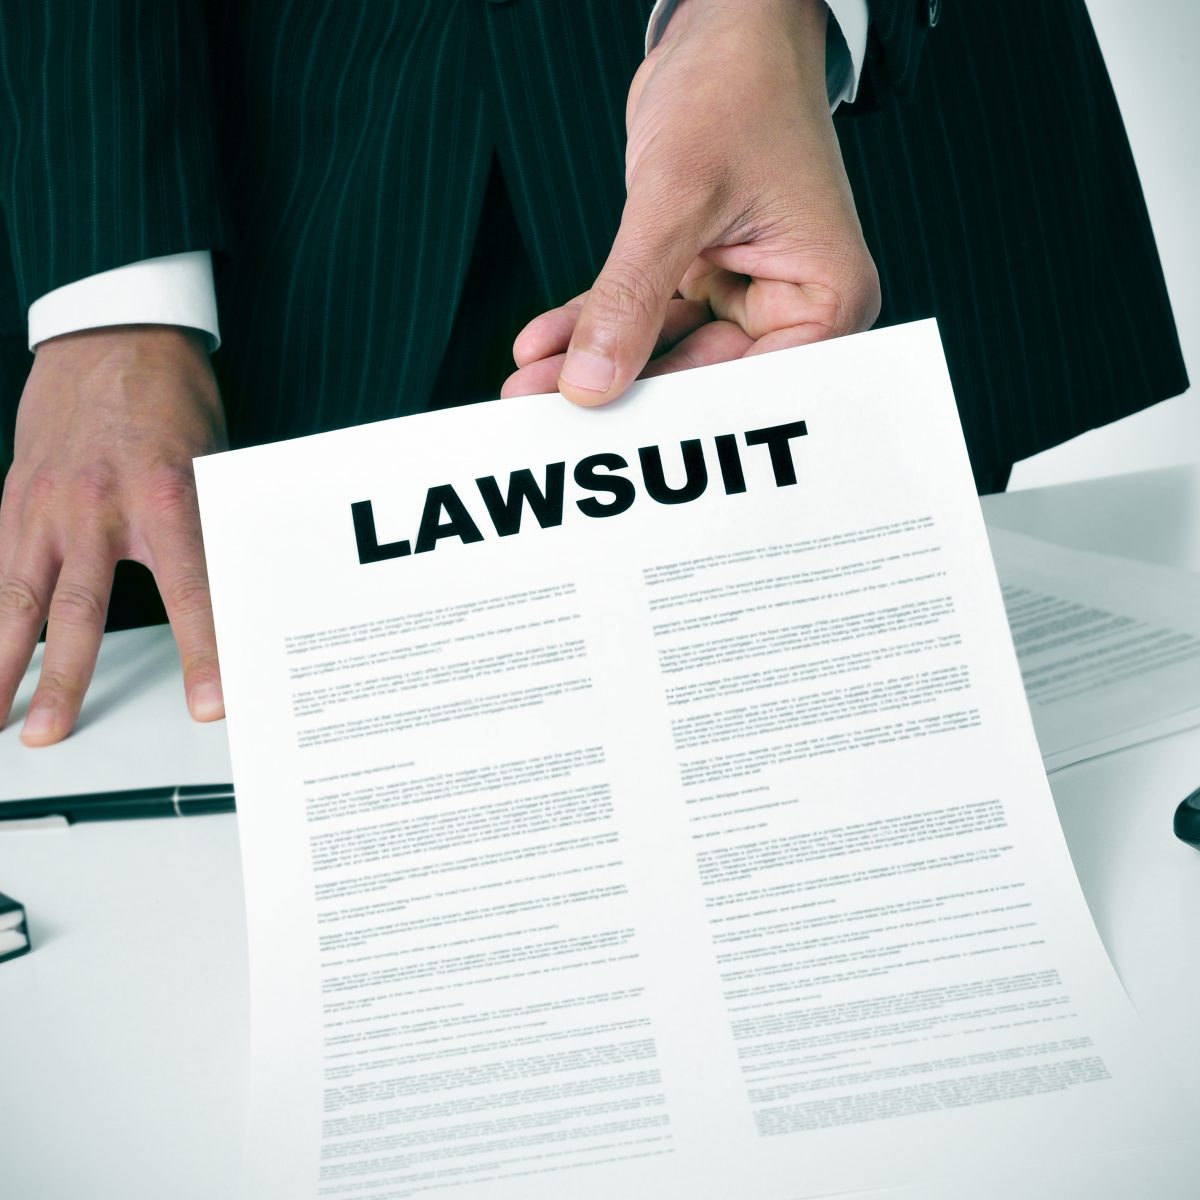 4 Workplace Policies To Protect Your Business from Lawsuits